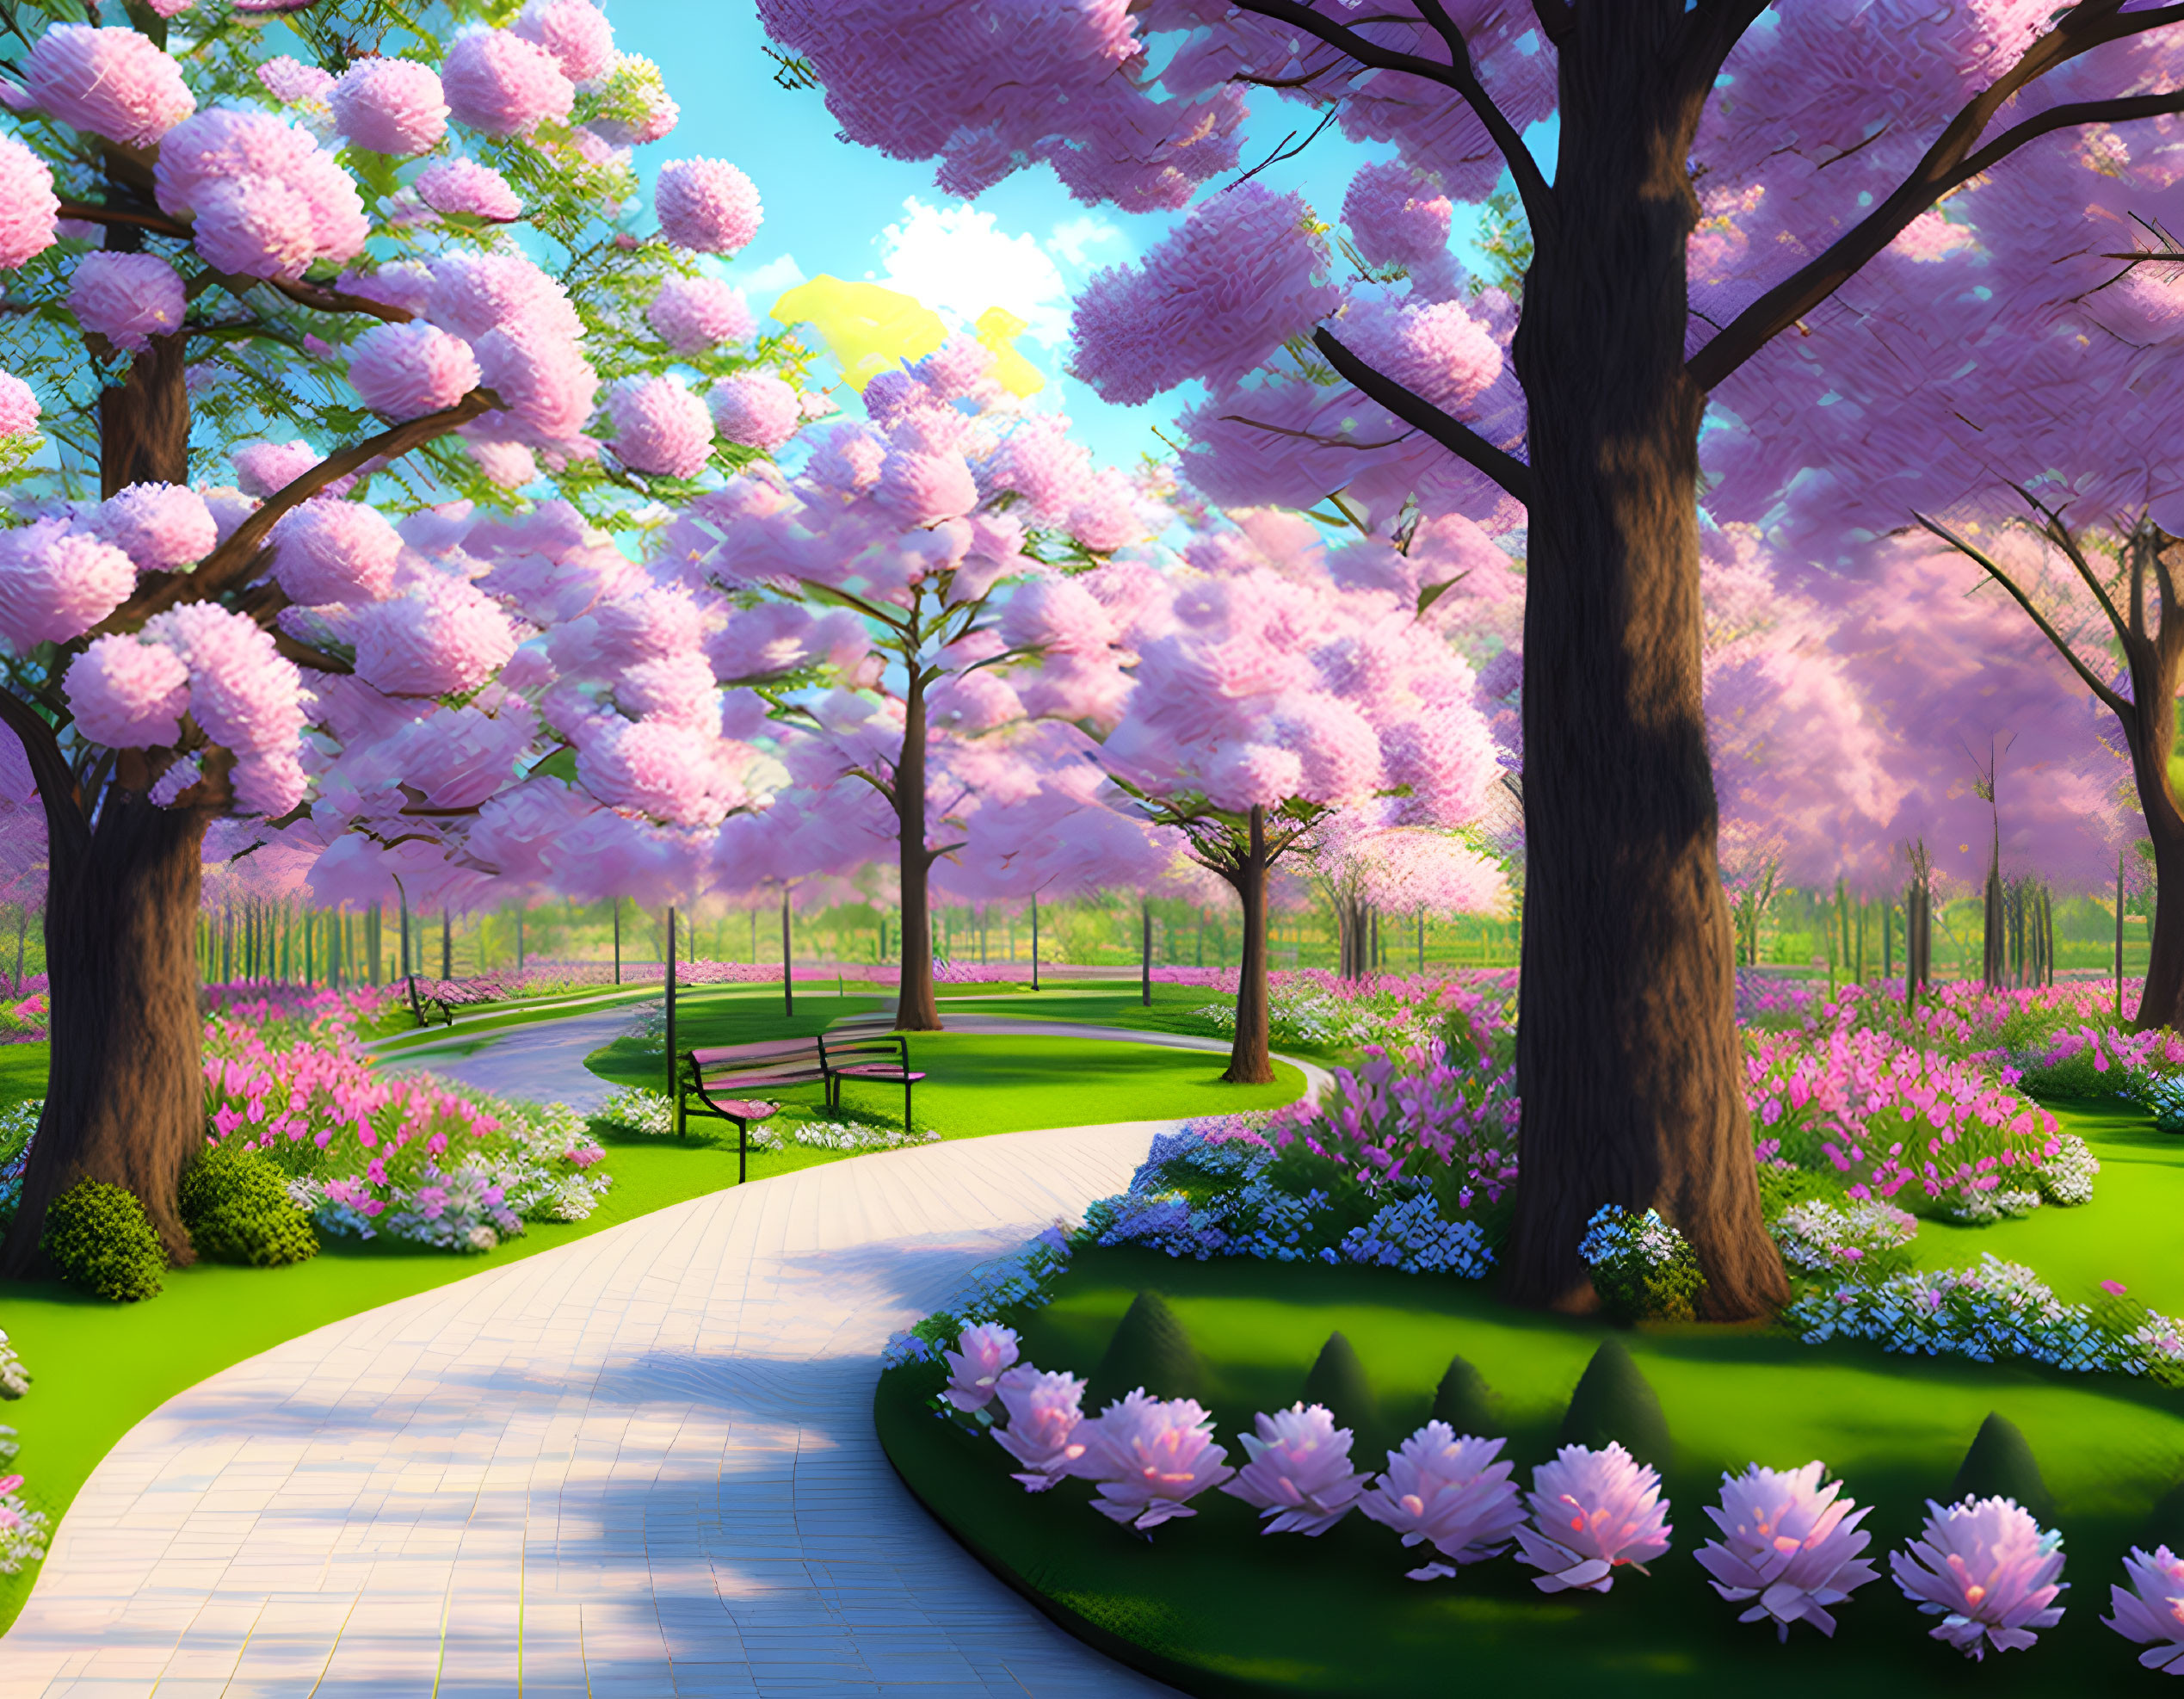 Tranquil Park with Pink Cherry Blossoms and Winding Path